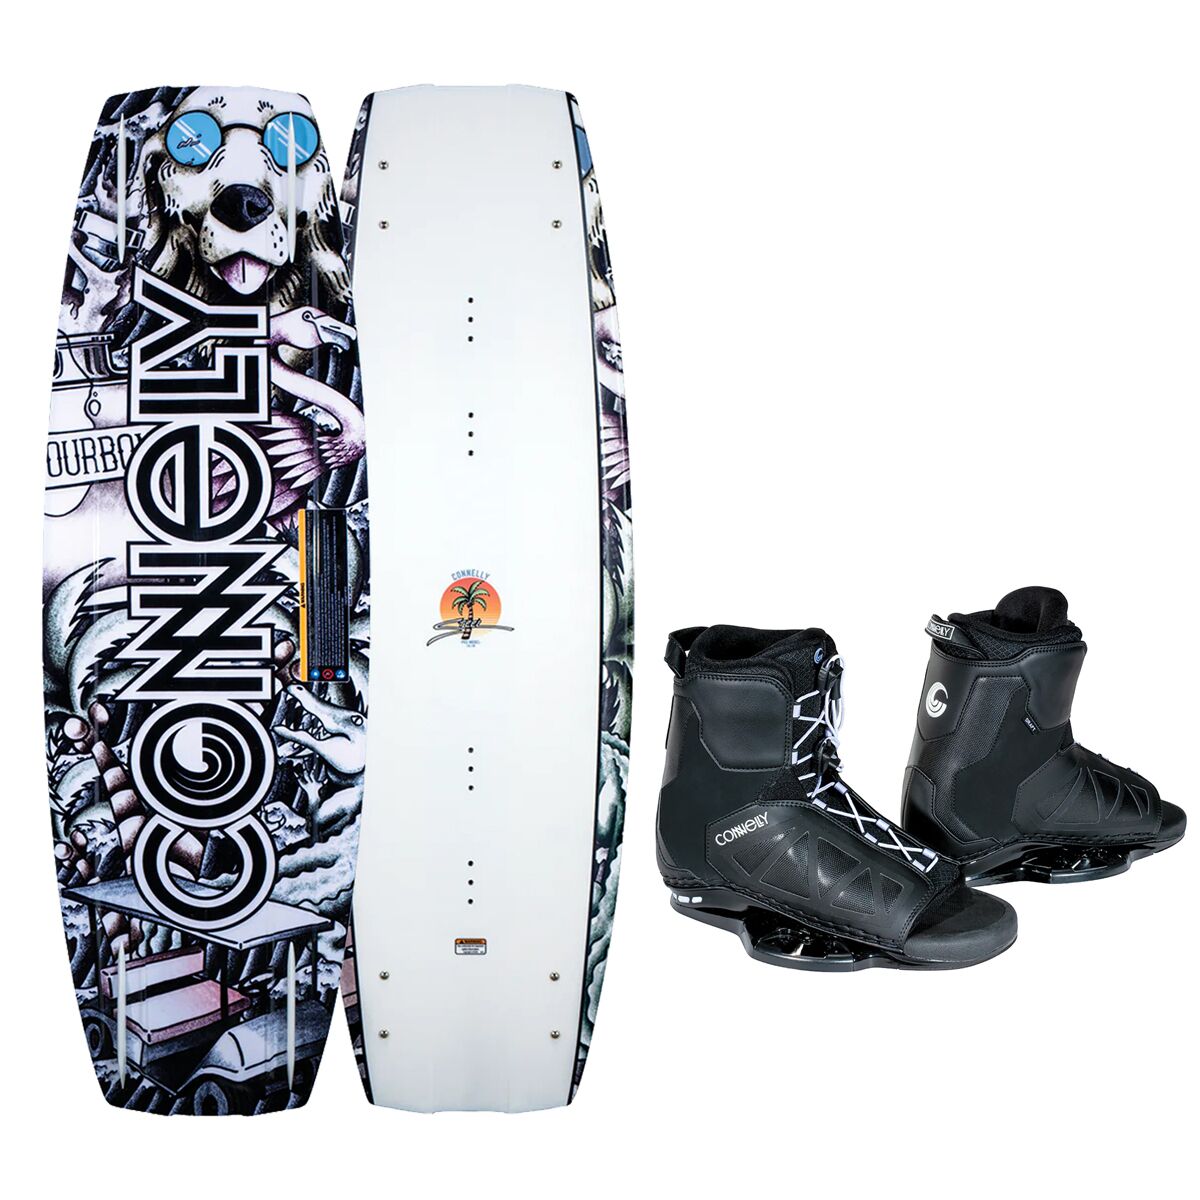 Connelly Skis Steel Wakeboard + Draft Binding